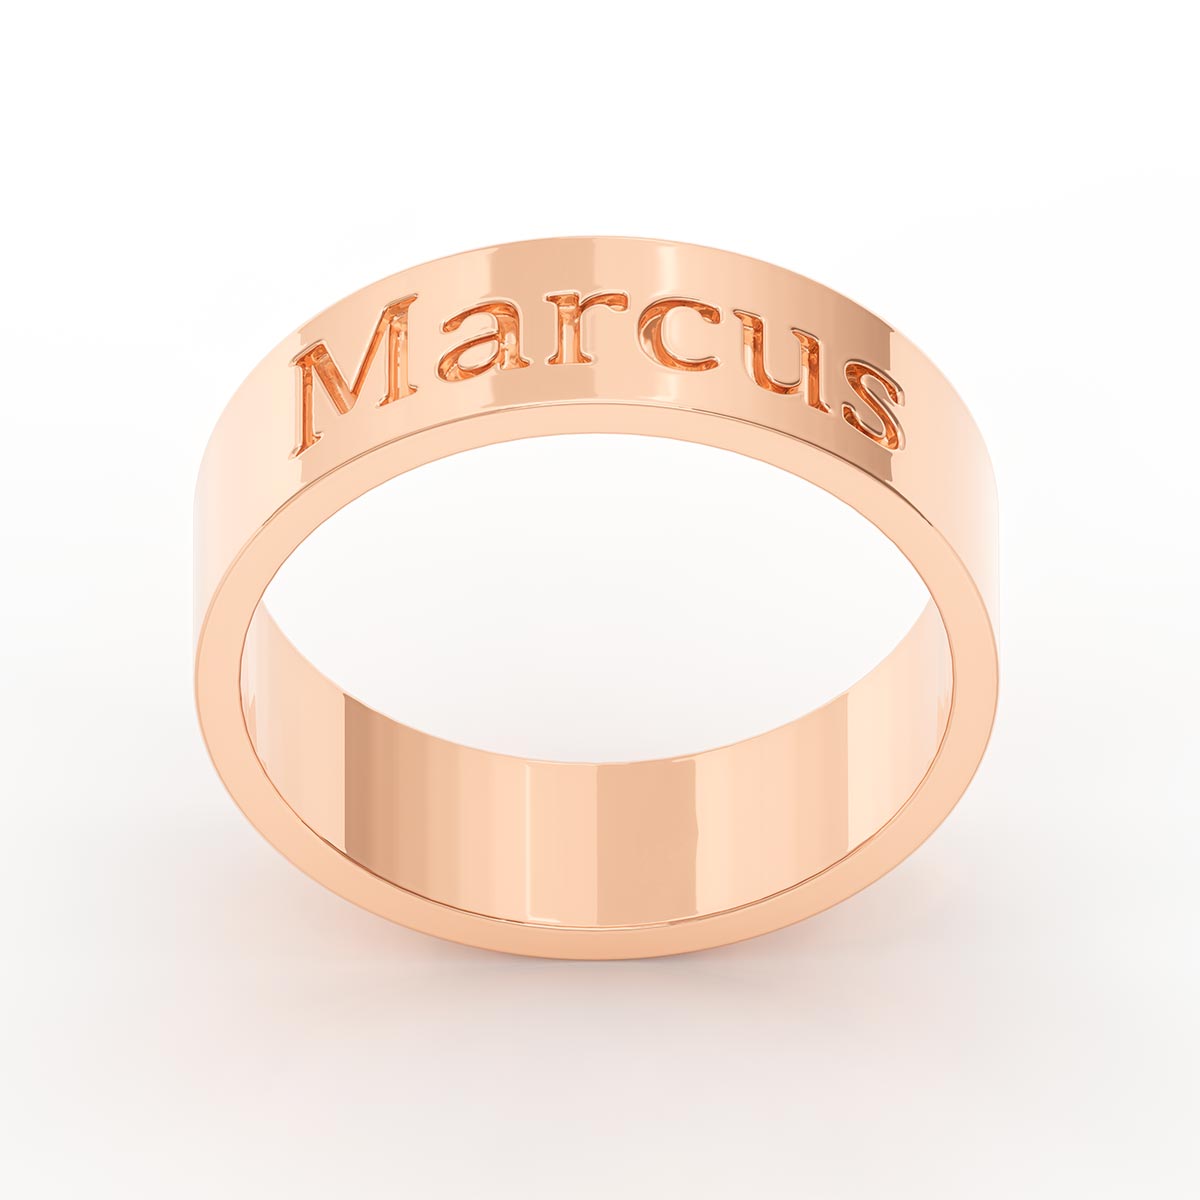 Men's Wide Ring With Name Engraving